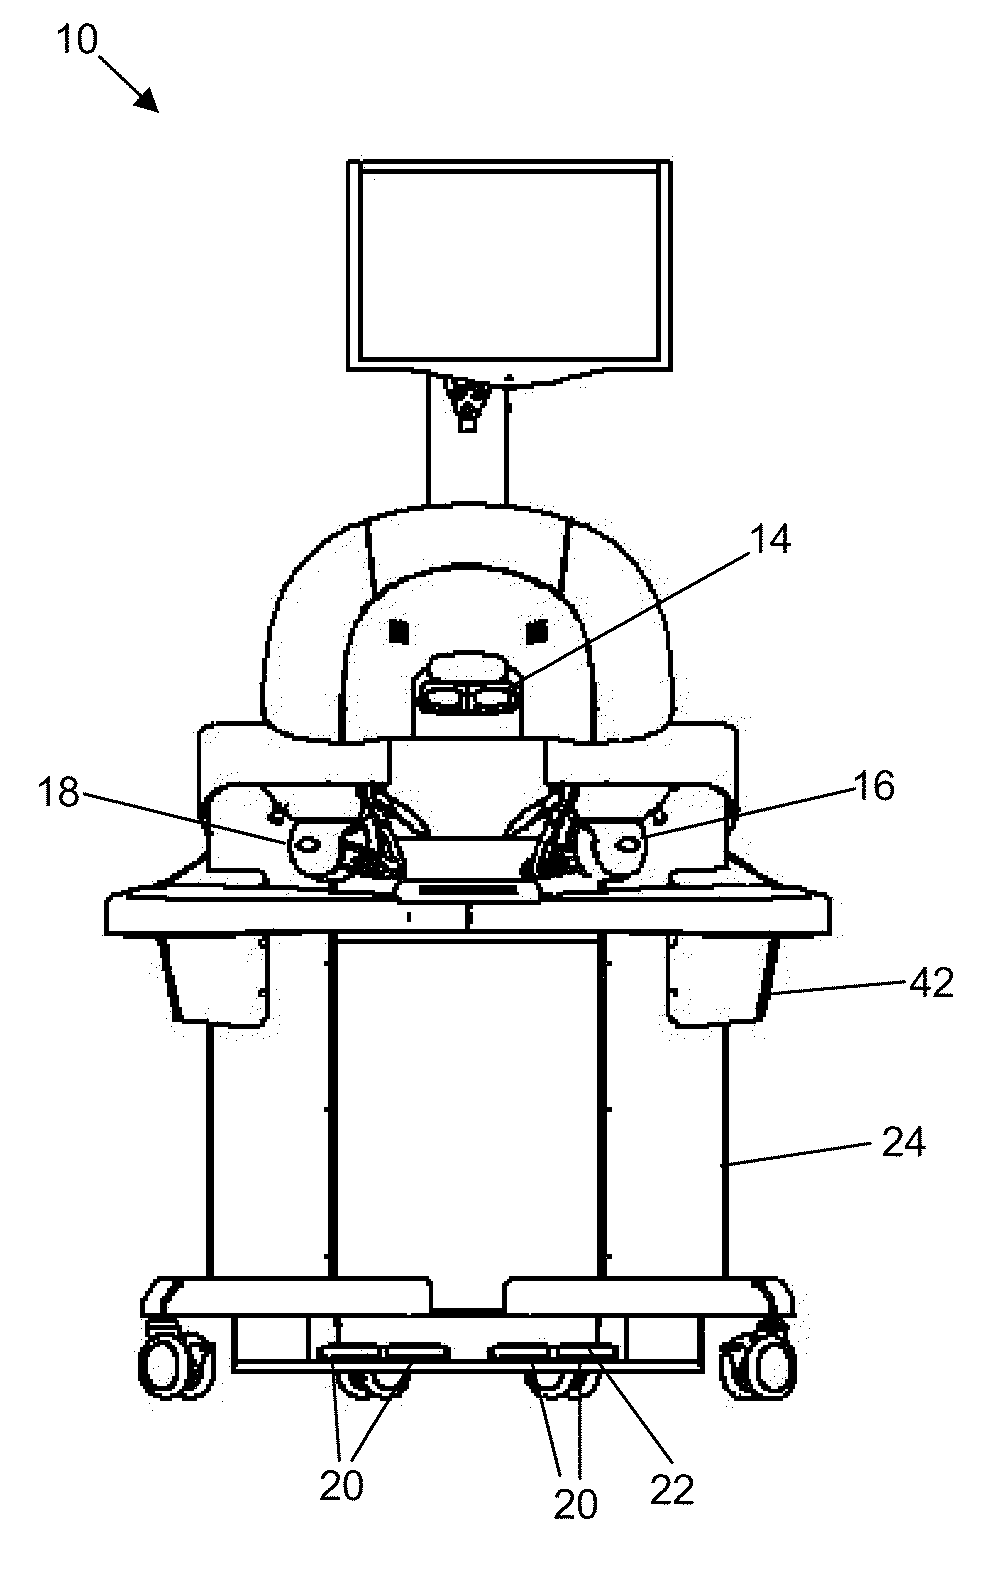 Method And System For Minimally-Invasive Surgery Training